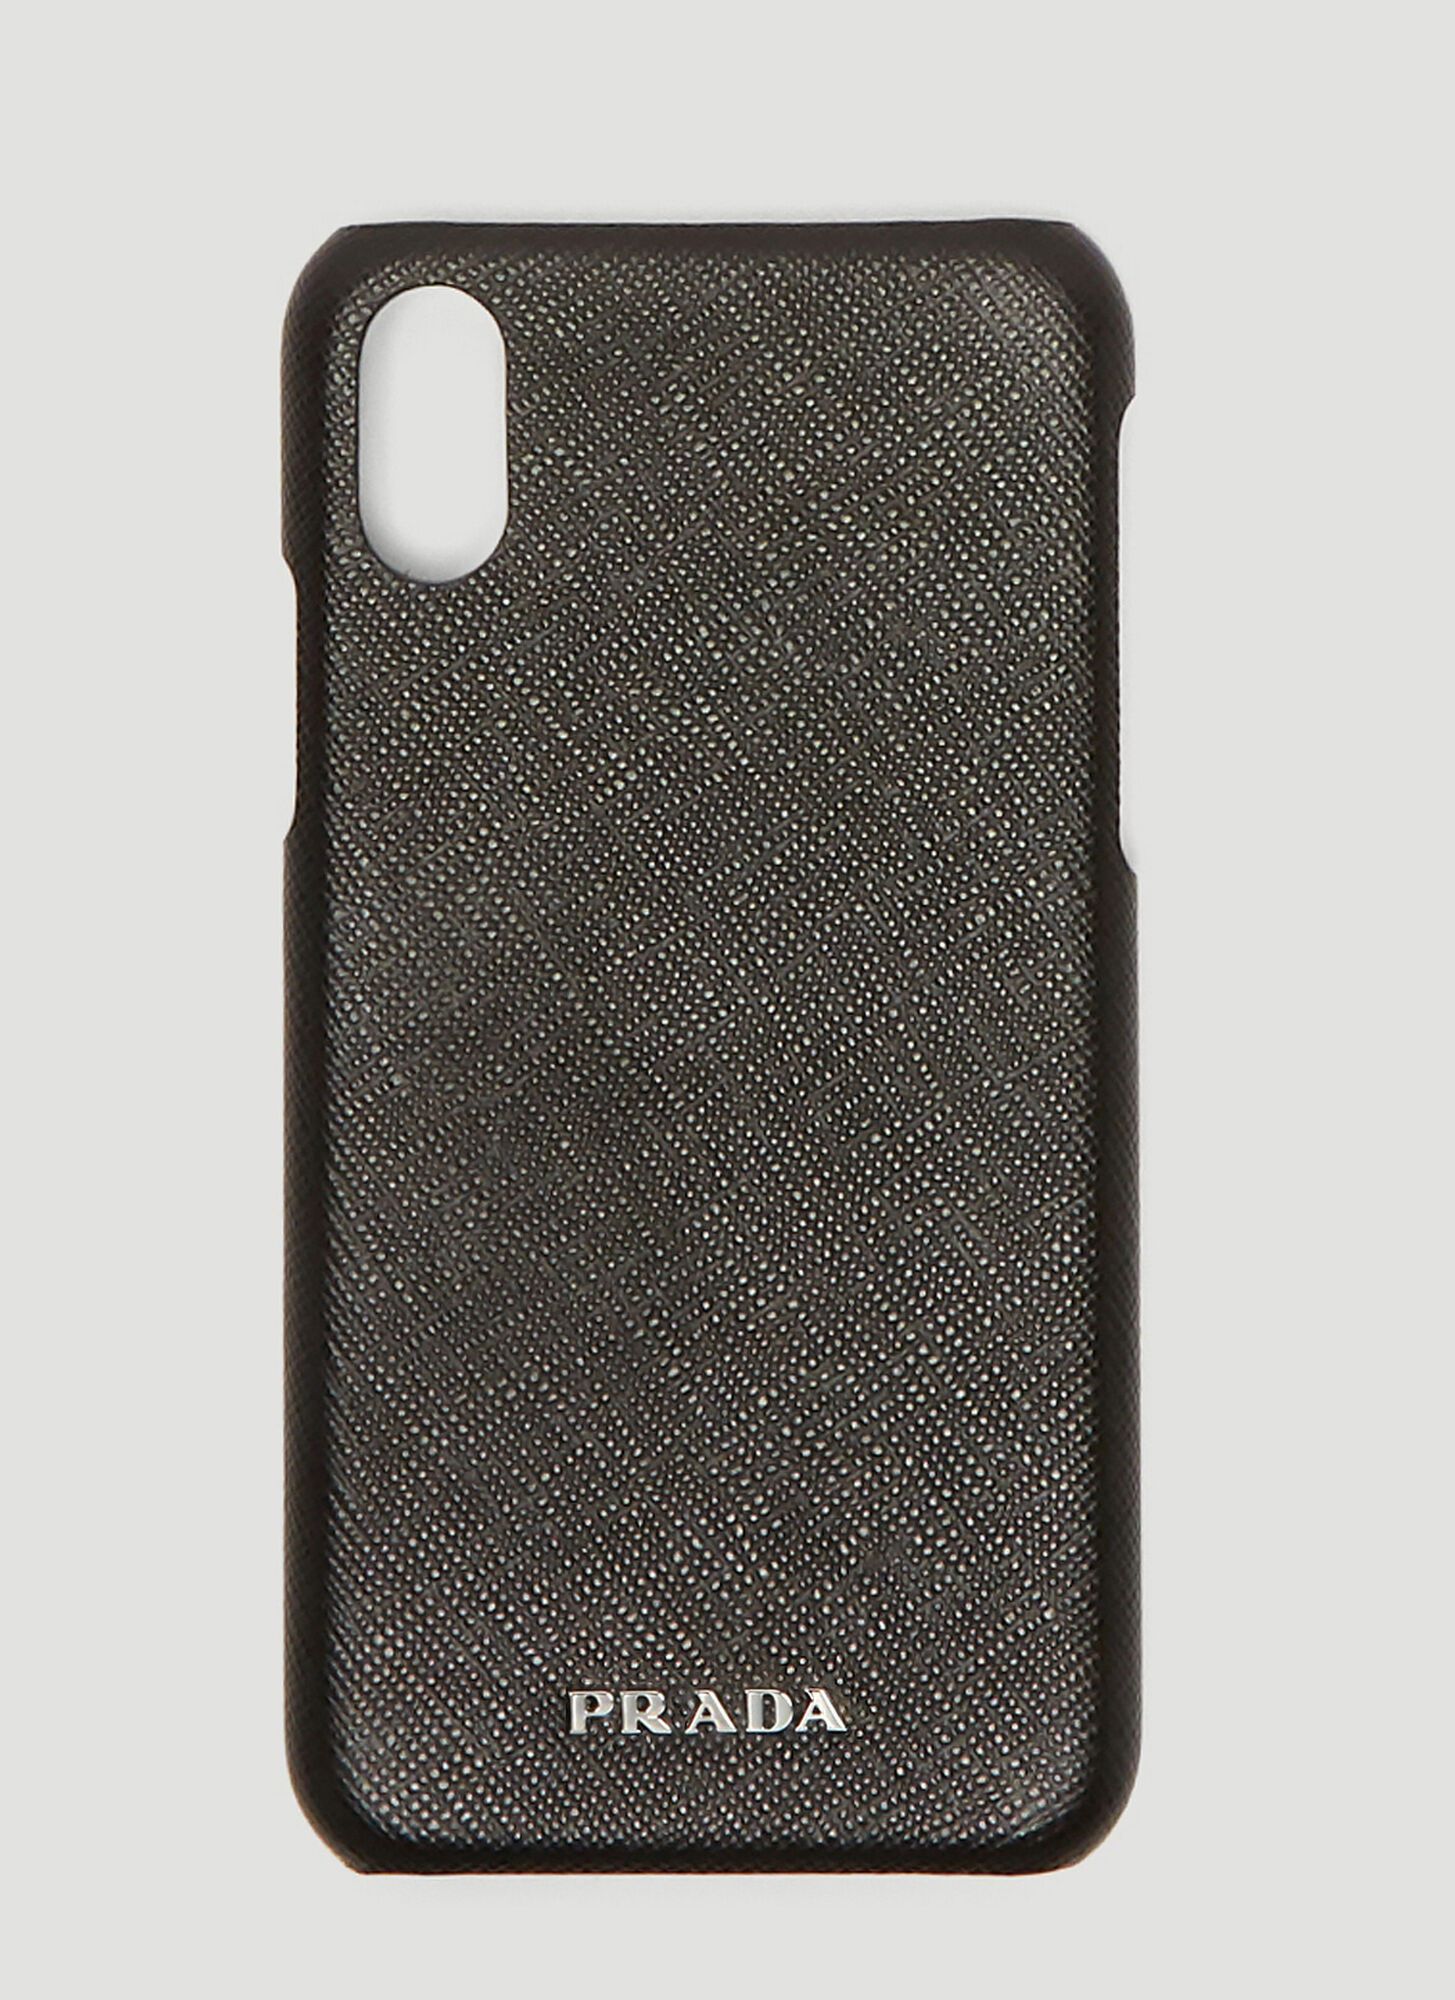 Prada Saffiano Leather iPhone X Case in Black size One Size | The